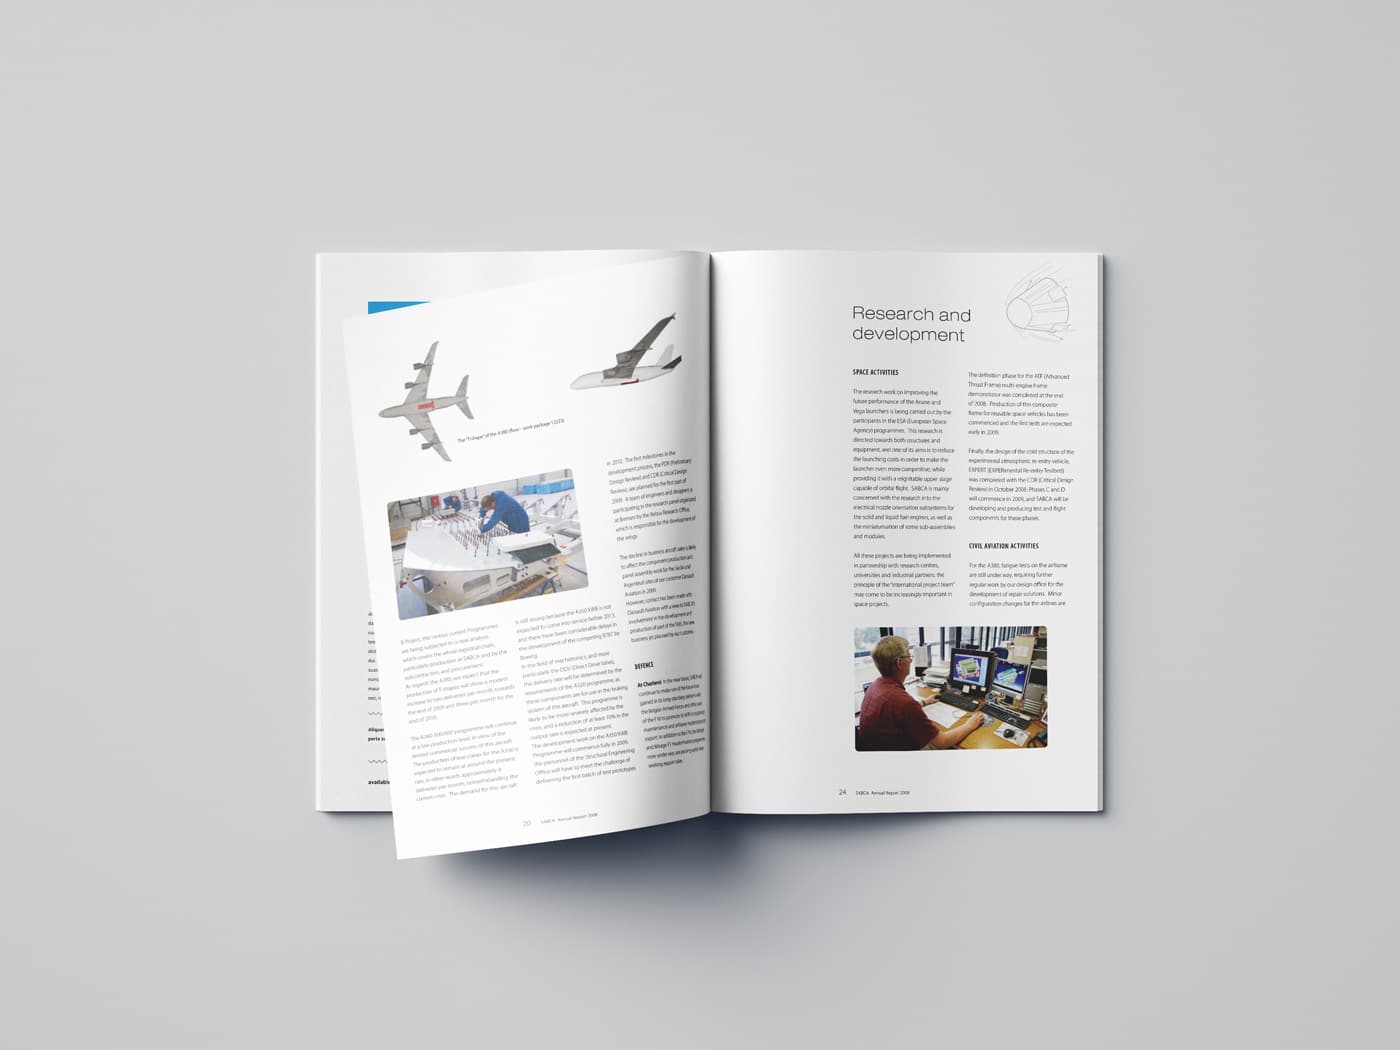 Sabca annual report pages graphic web designer brussels simpl-Simpl. SRL is a graphic design studio in Brussels